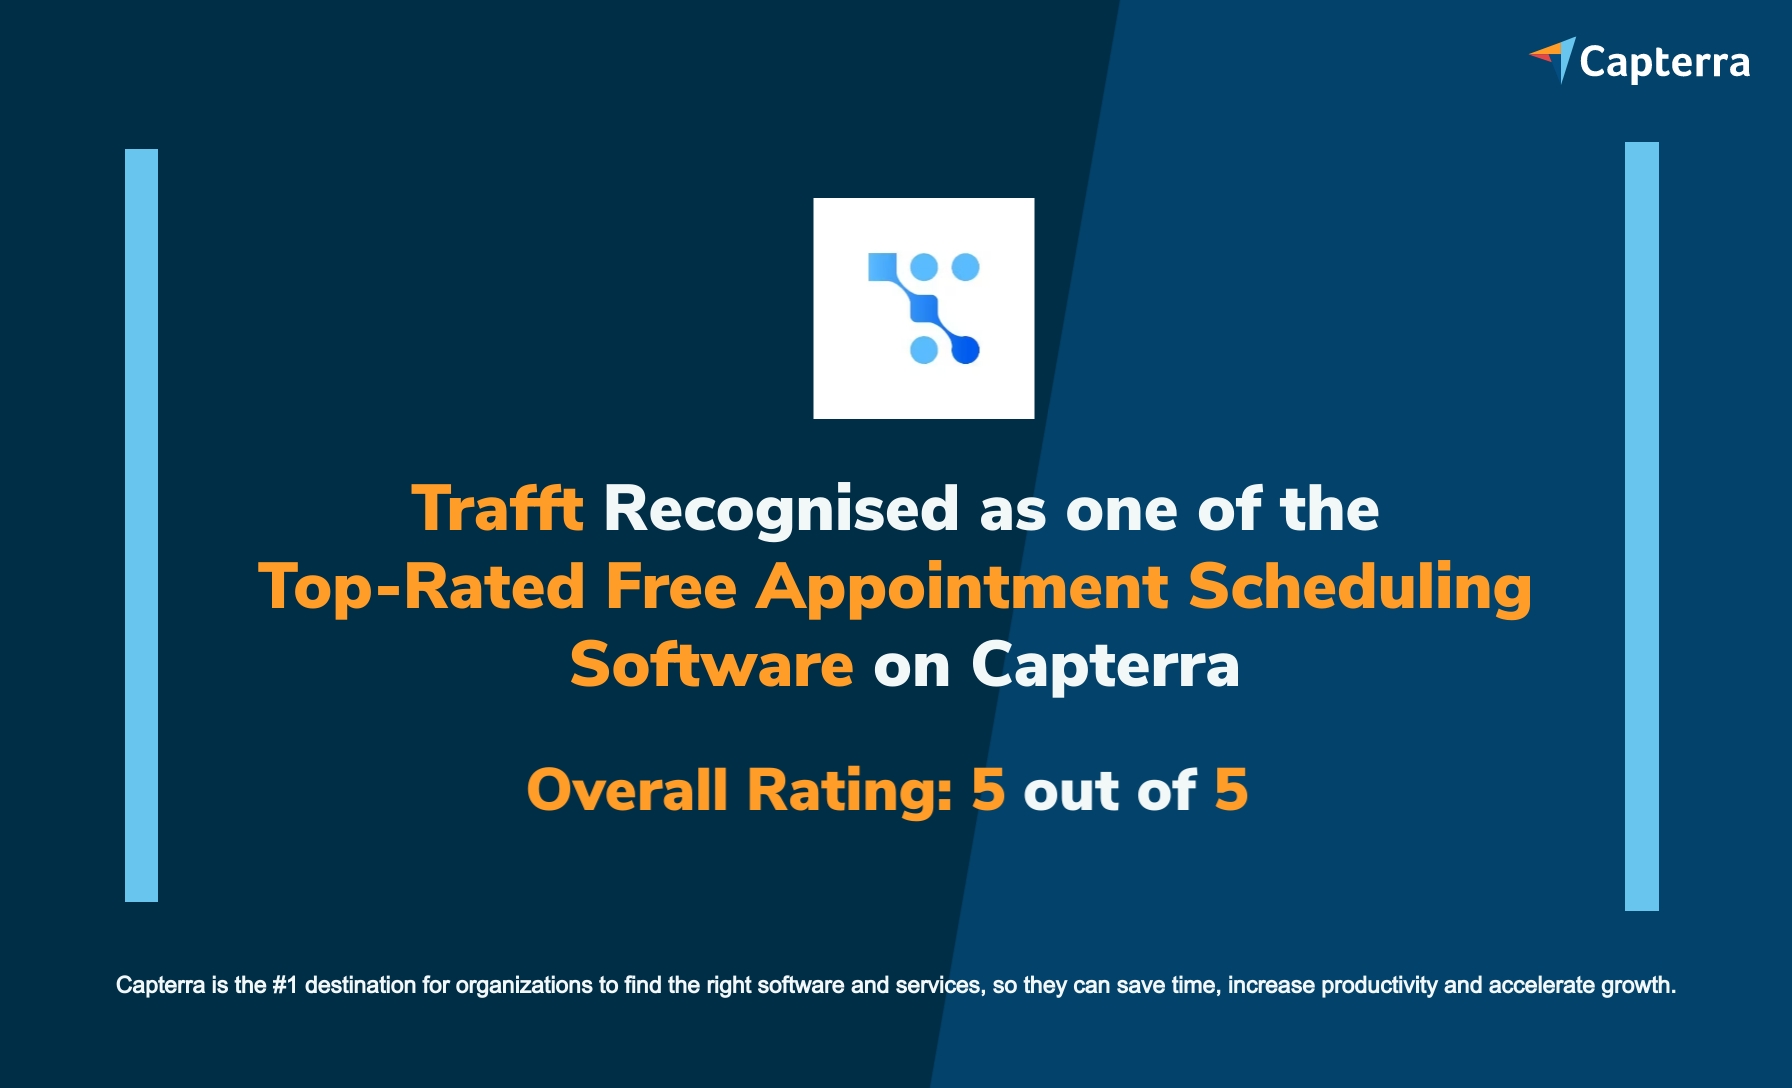 Trafft recognized as the best free appointment scheduling software on Capterra